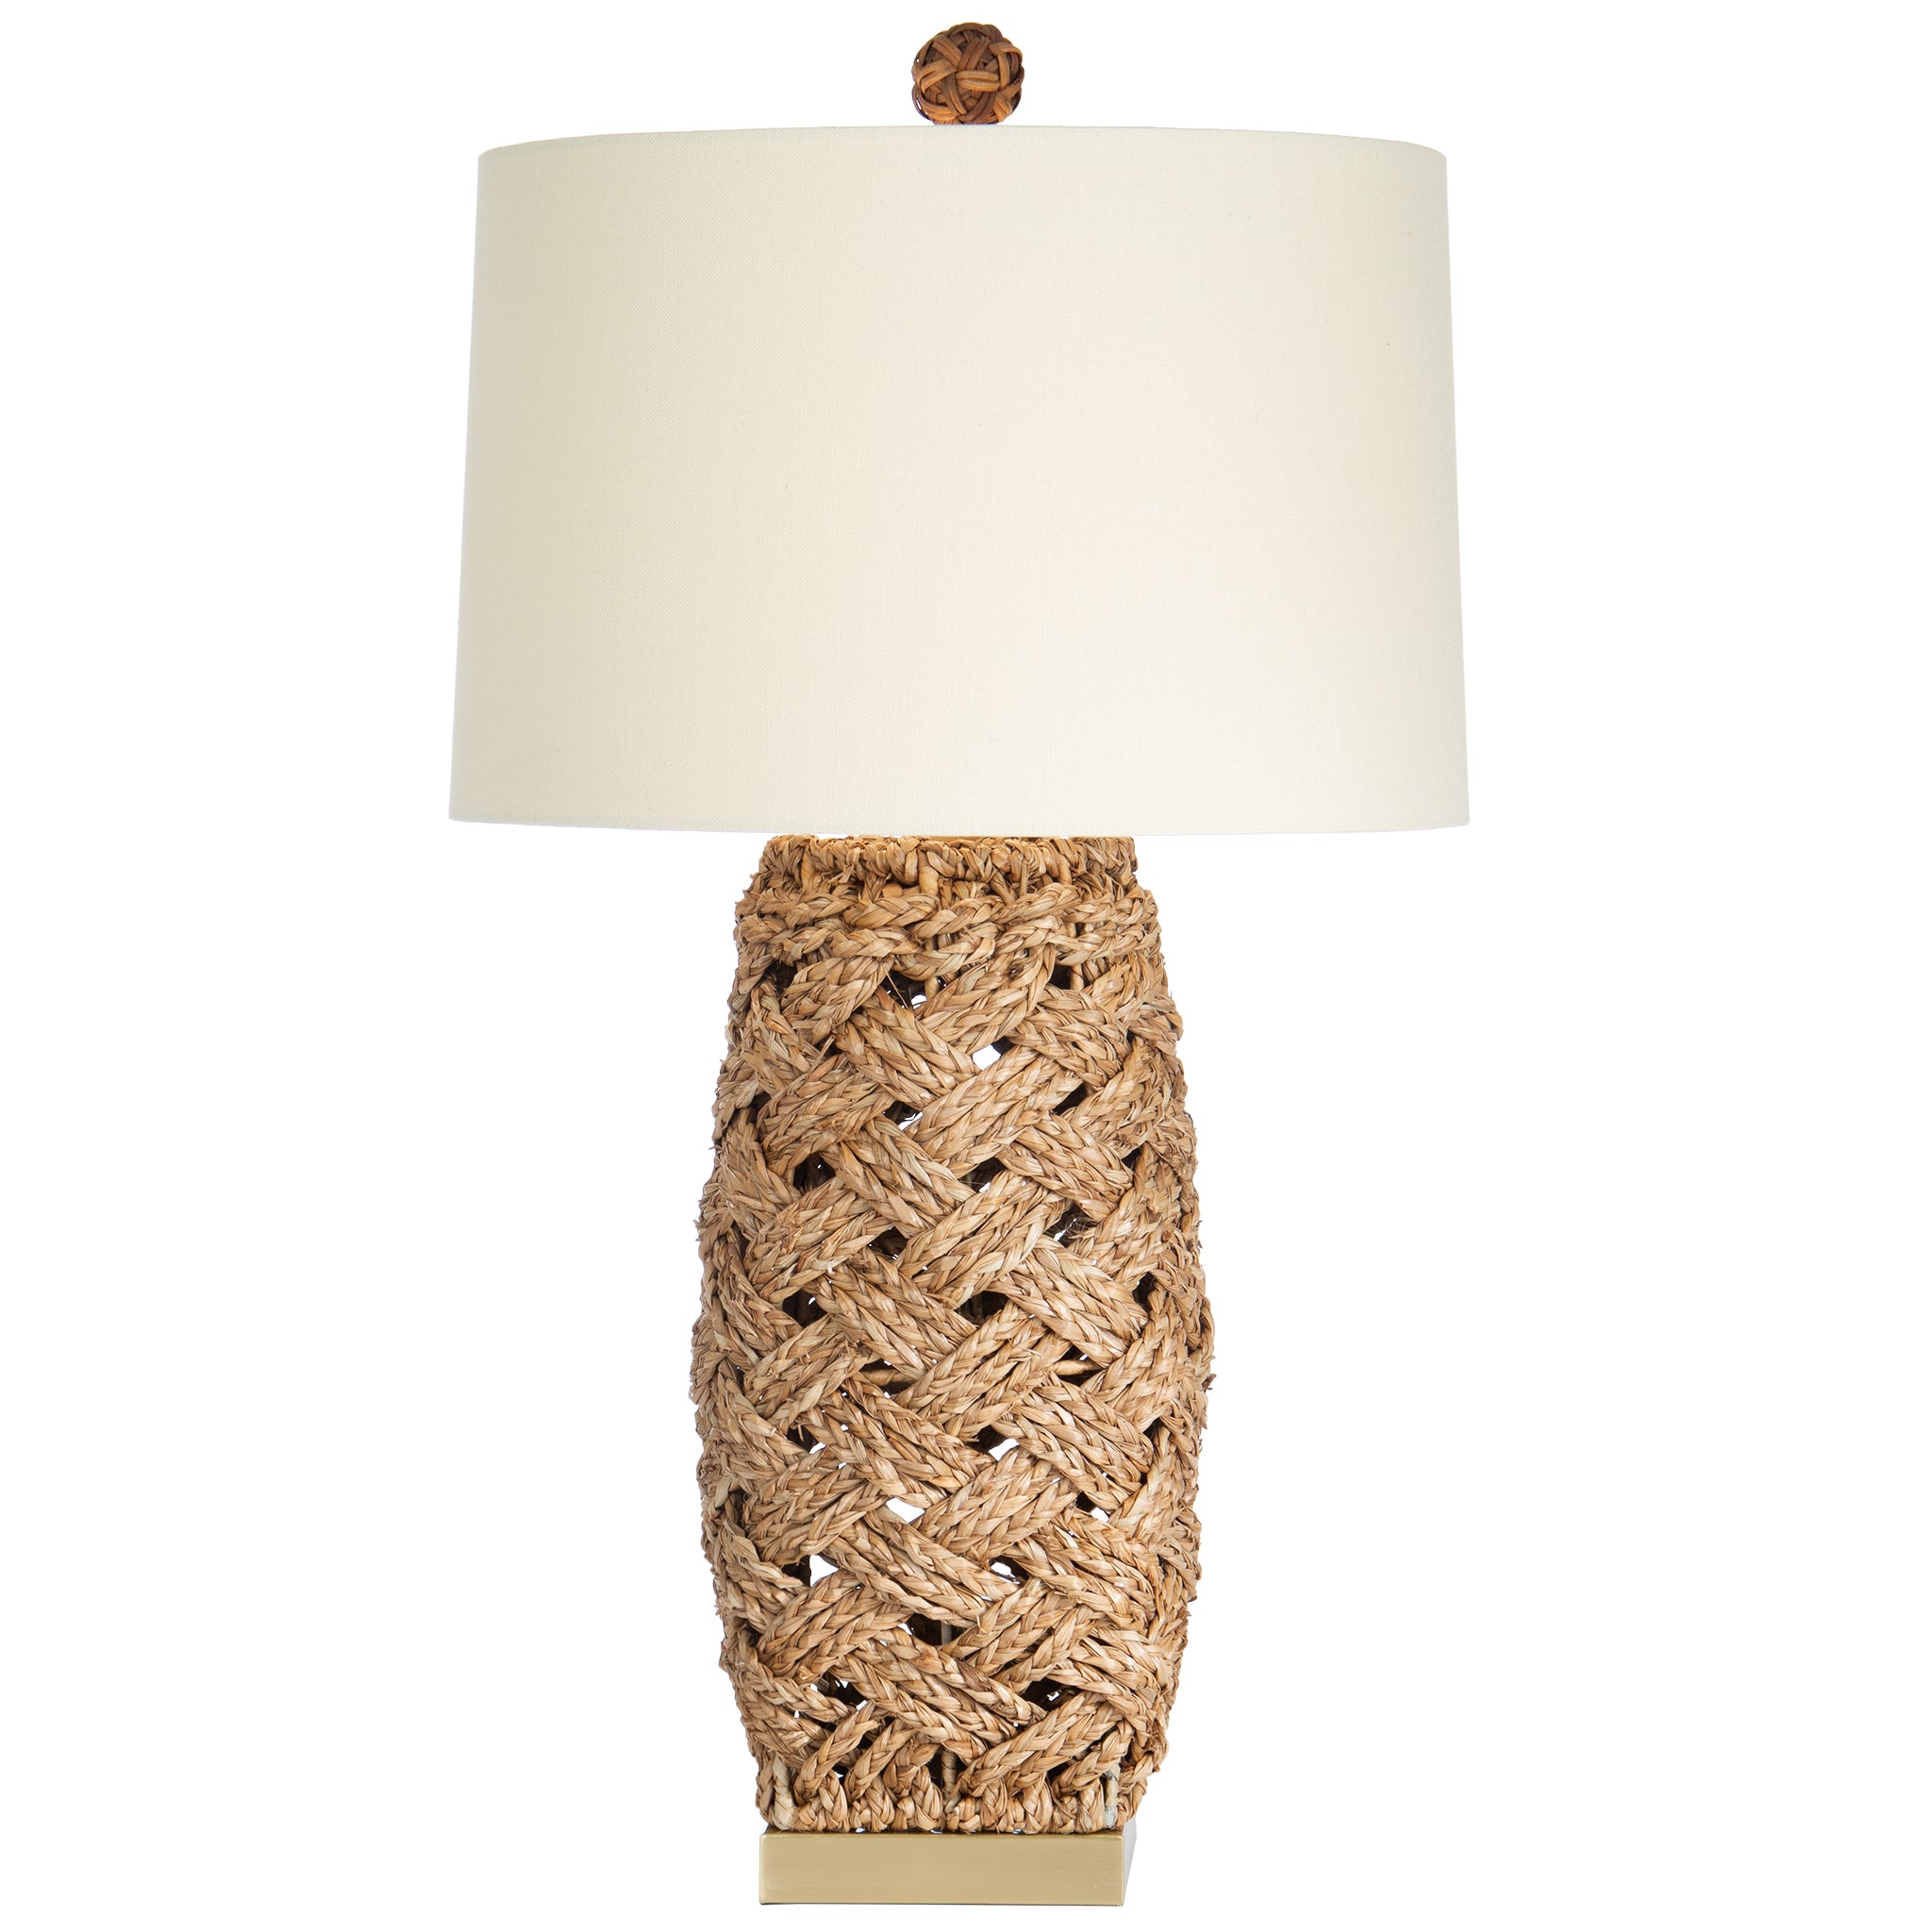 Woven Seagrass Table Lamp